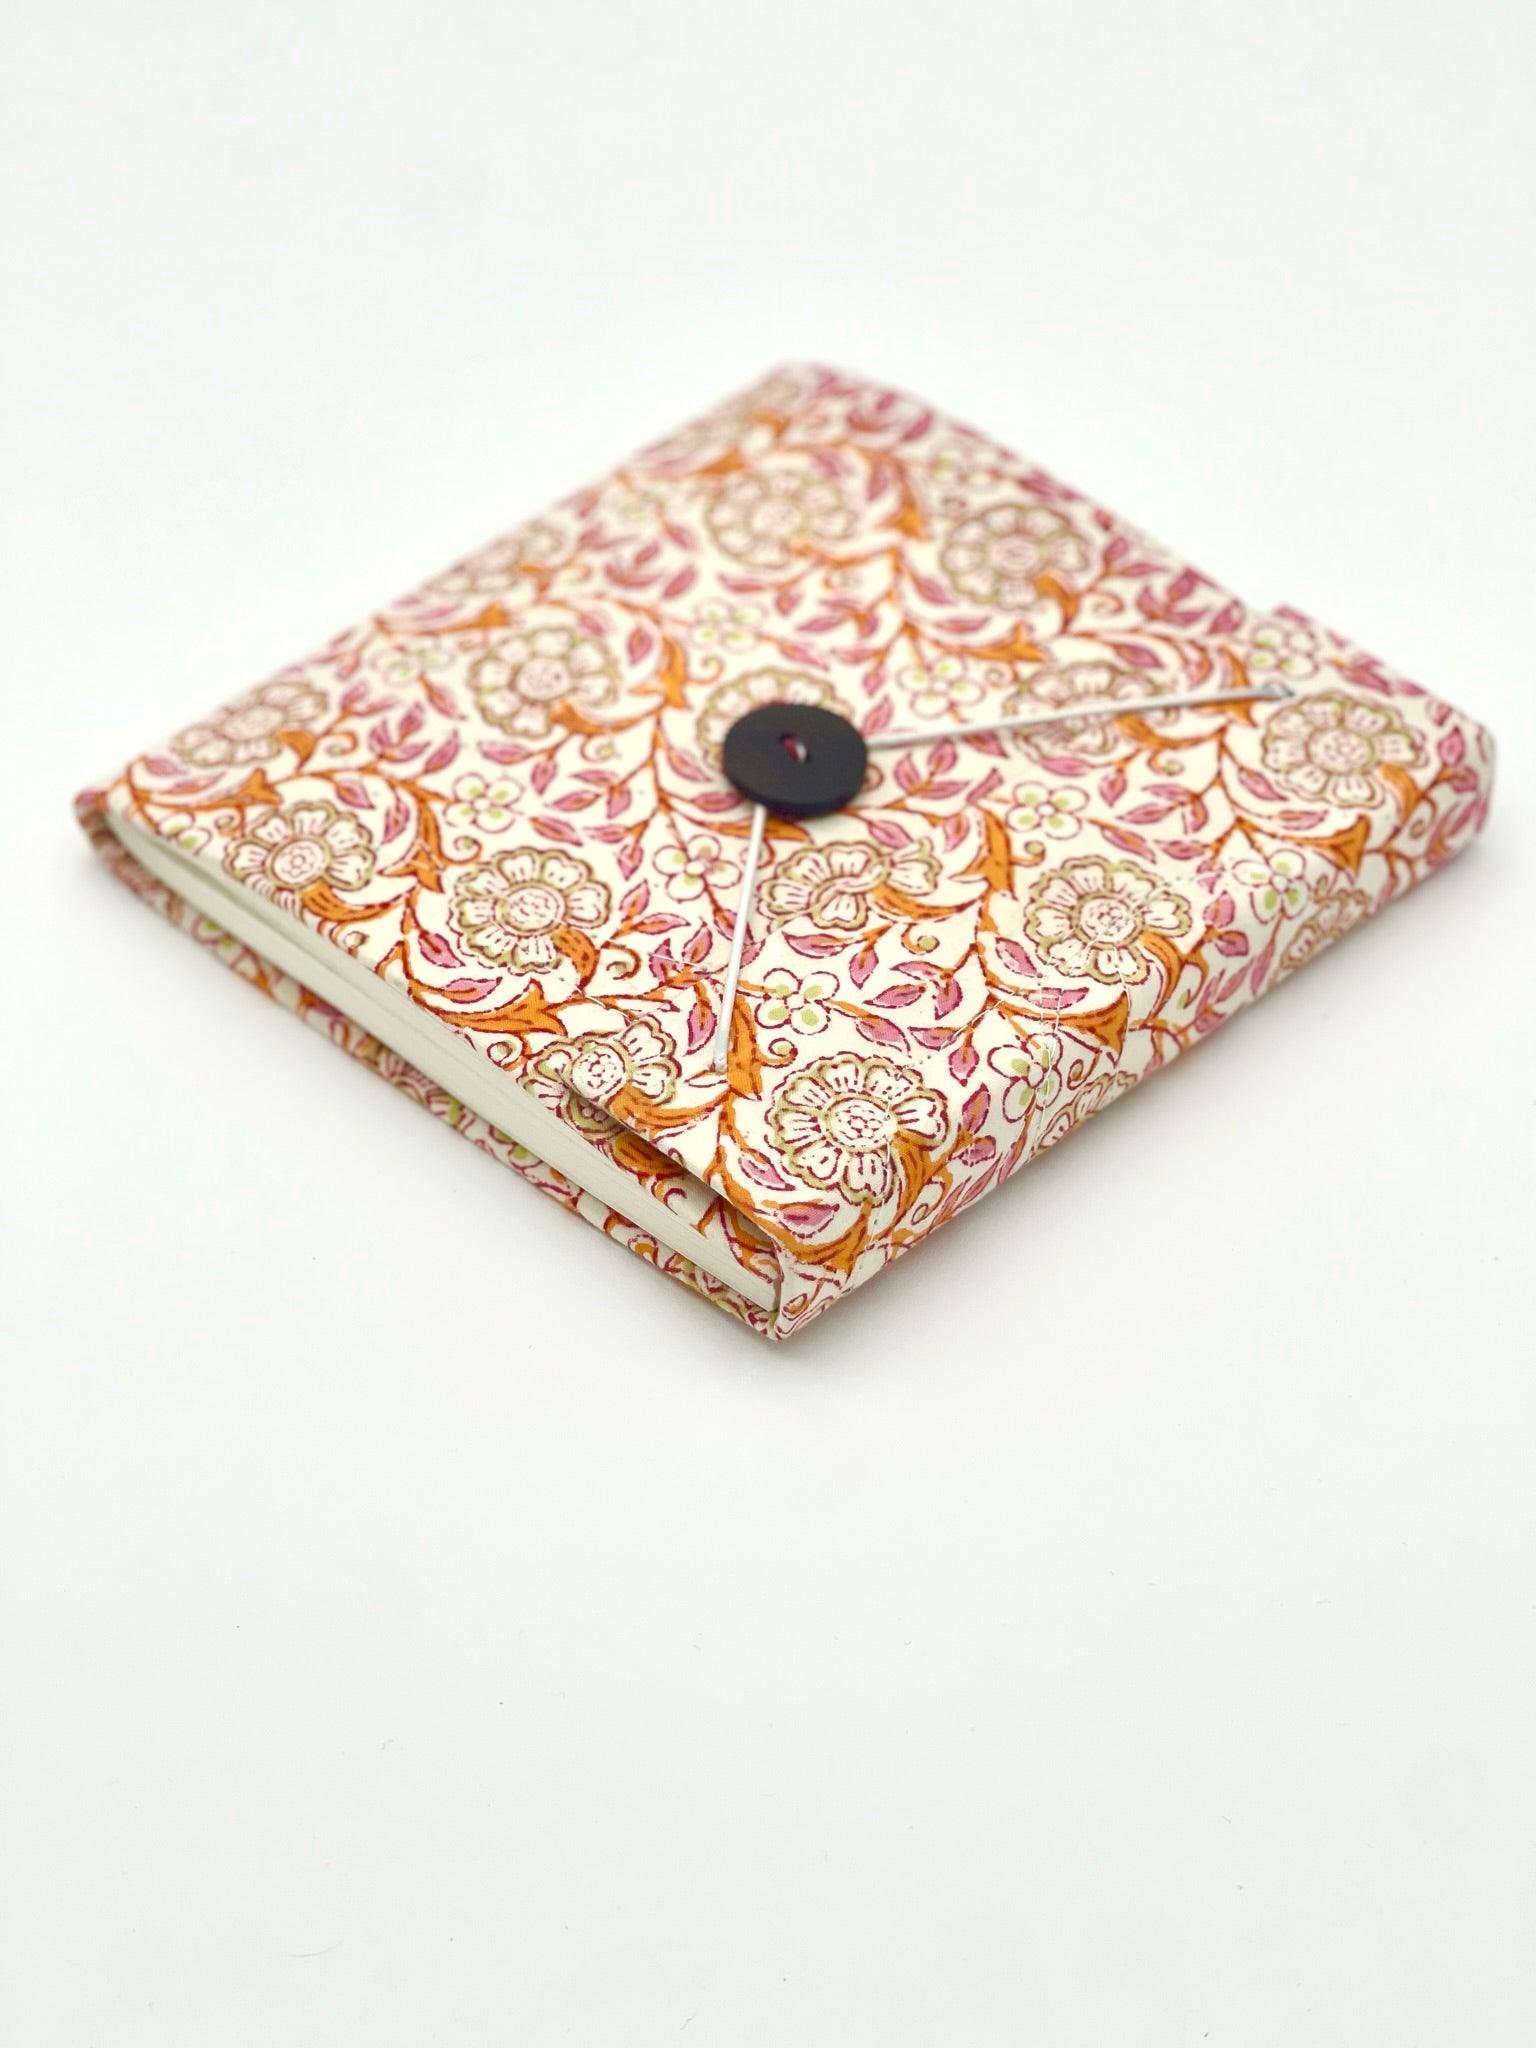 Block Print Journal/Notebook, Orange & Pink Floral - Unlined, 100 Pages, Thick Paper, Hard Cover - Transcend